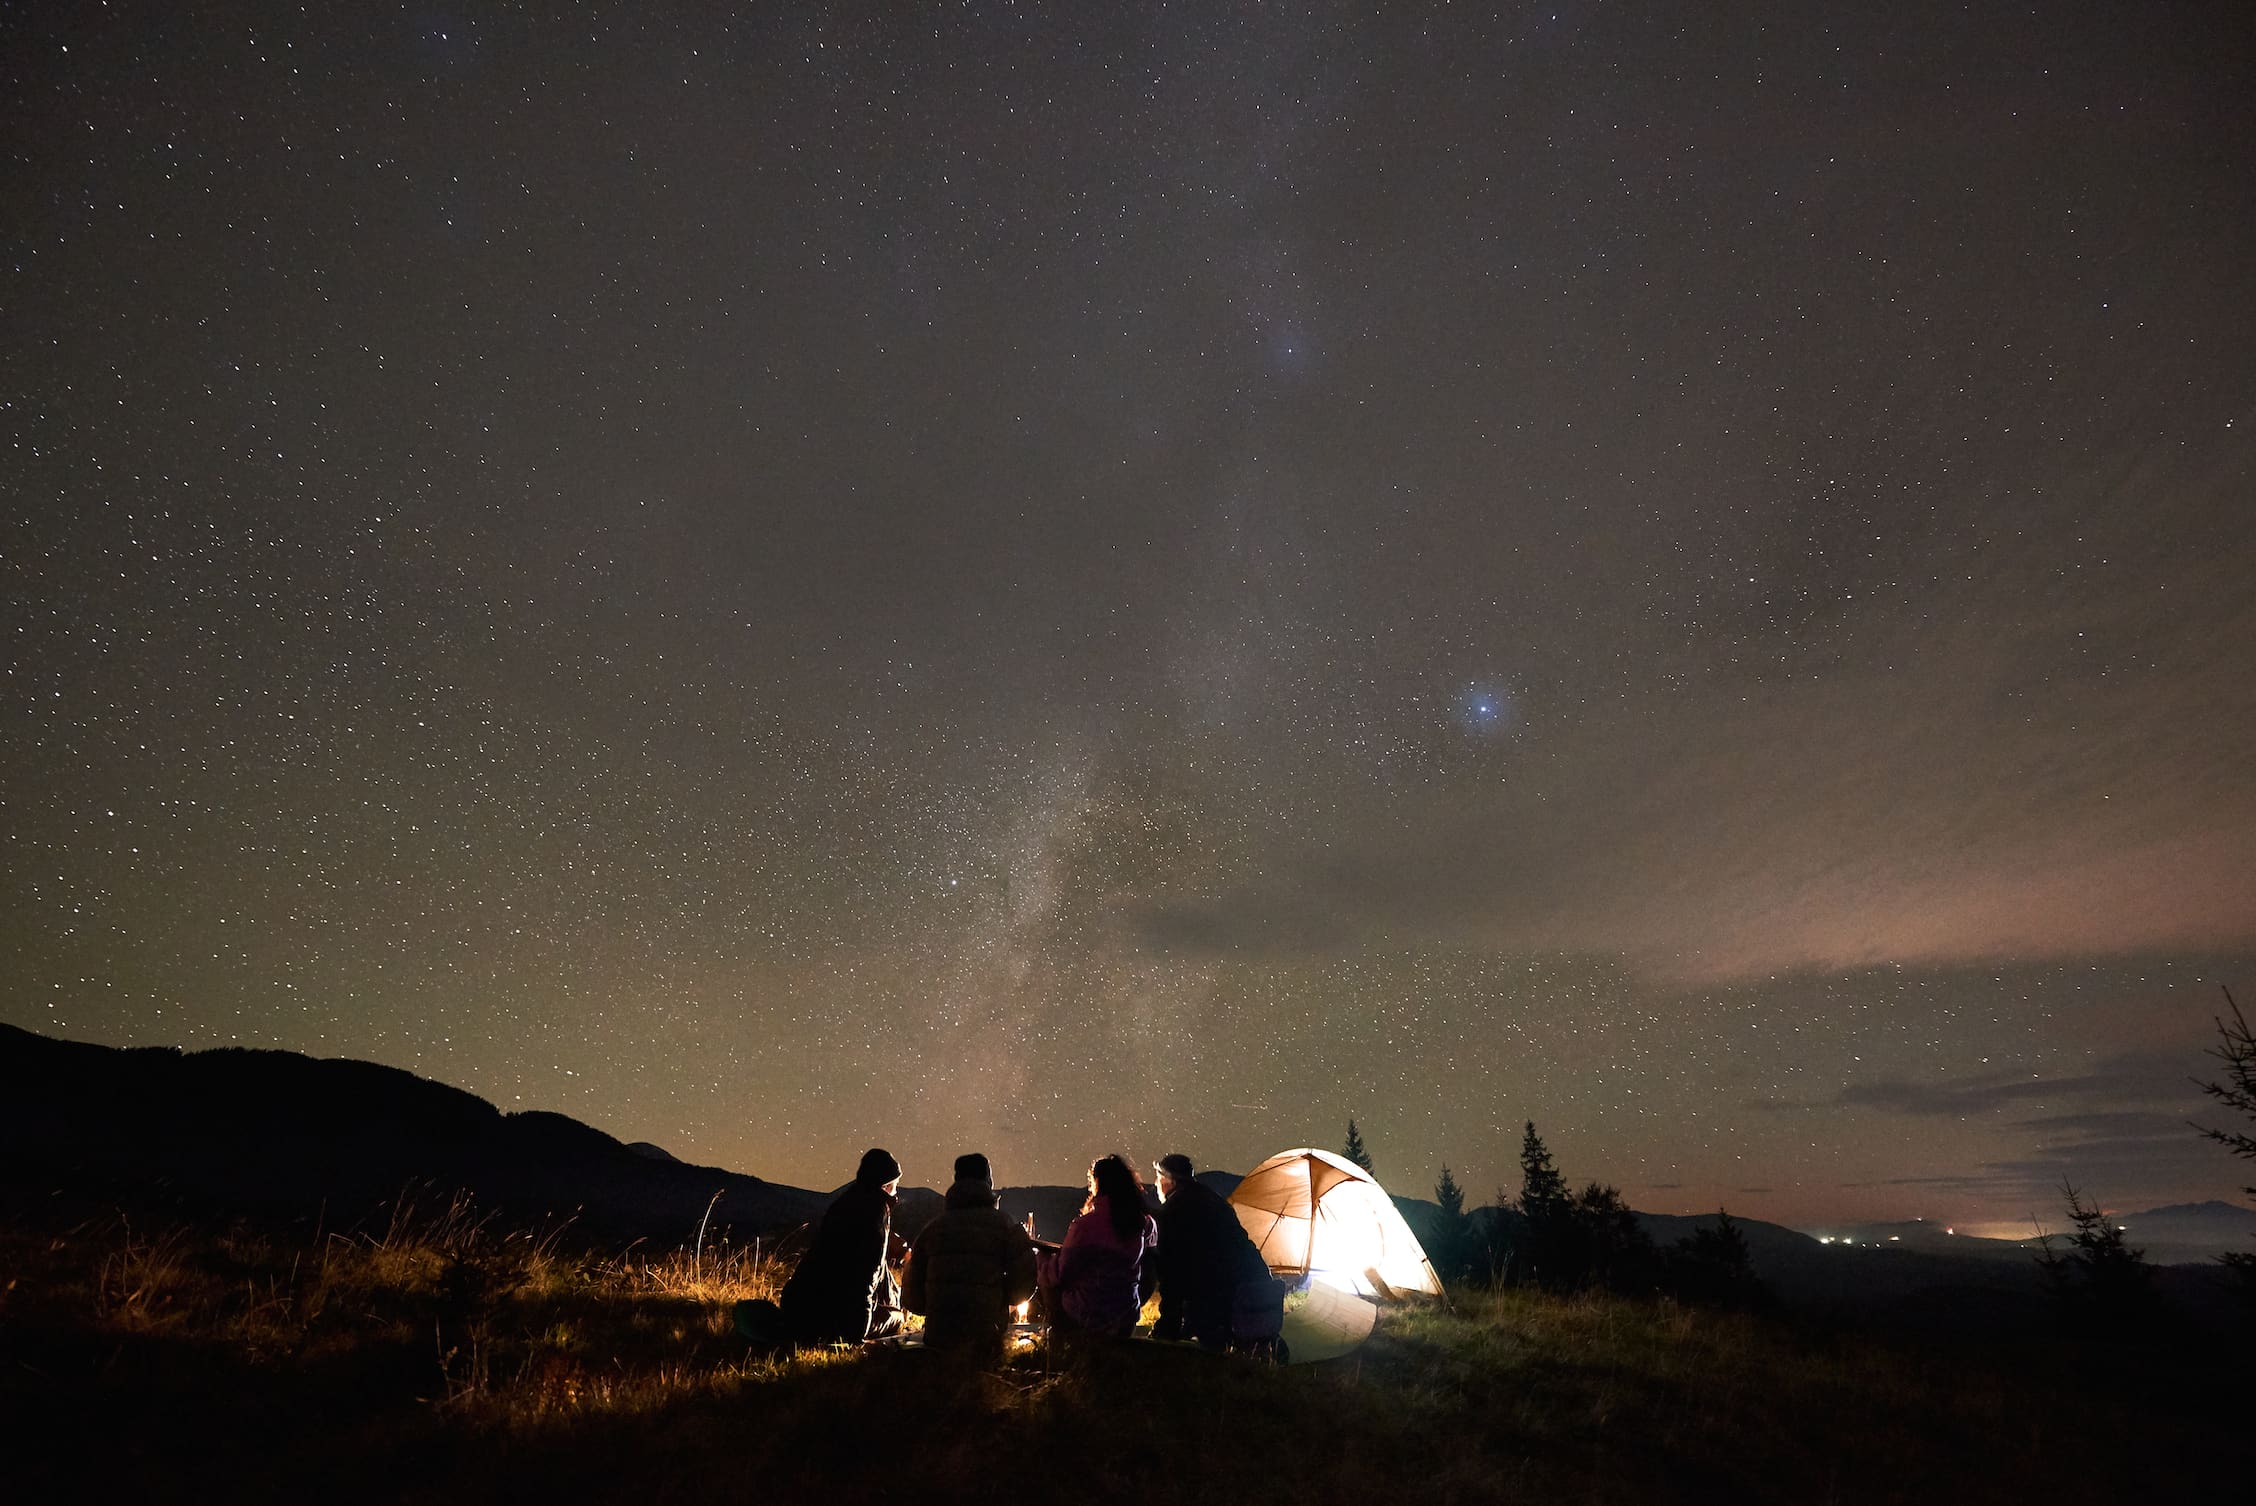 Camping under a starry night sky